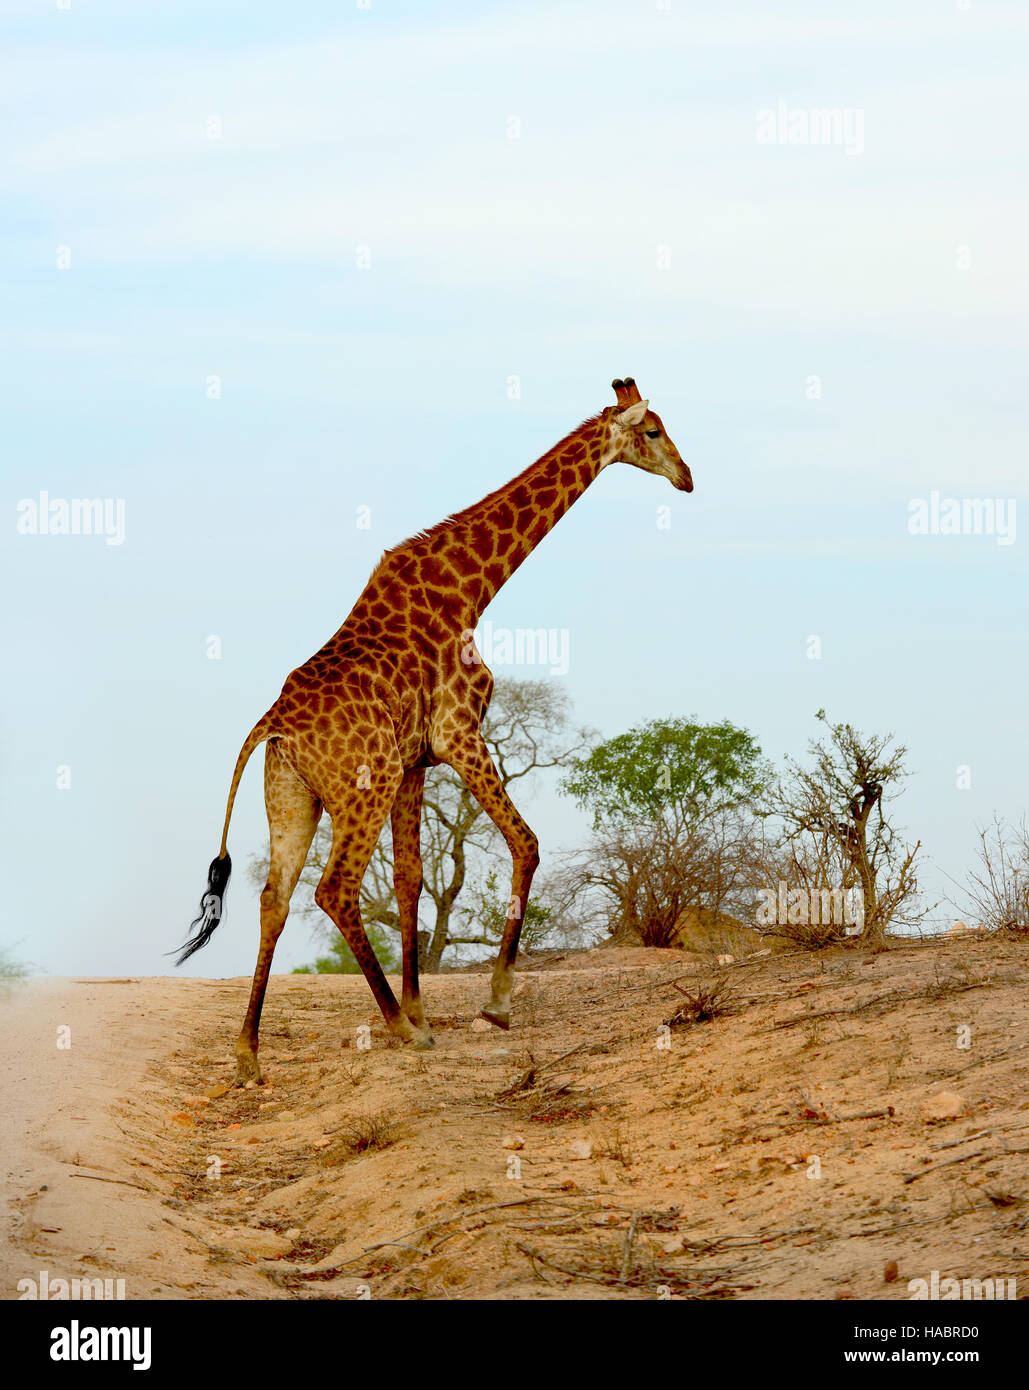 Giraffe in South Africa's Kruger National Park walking across a road Stock Photo